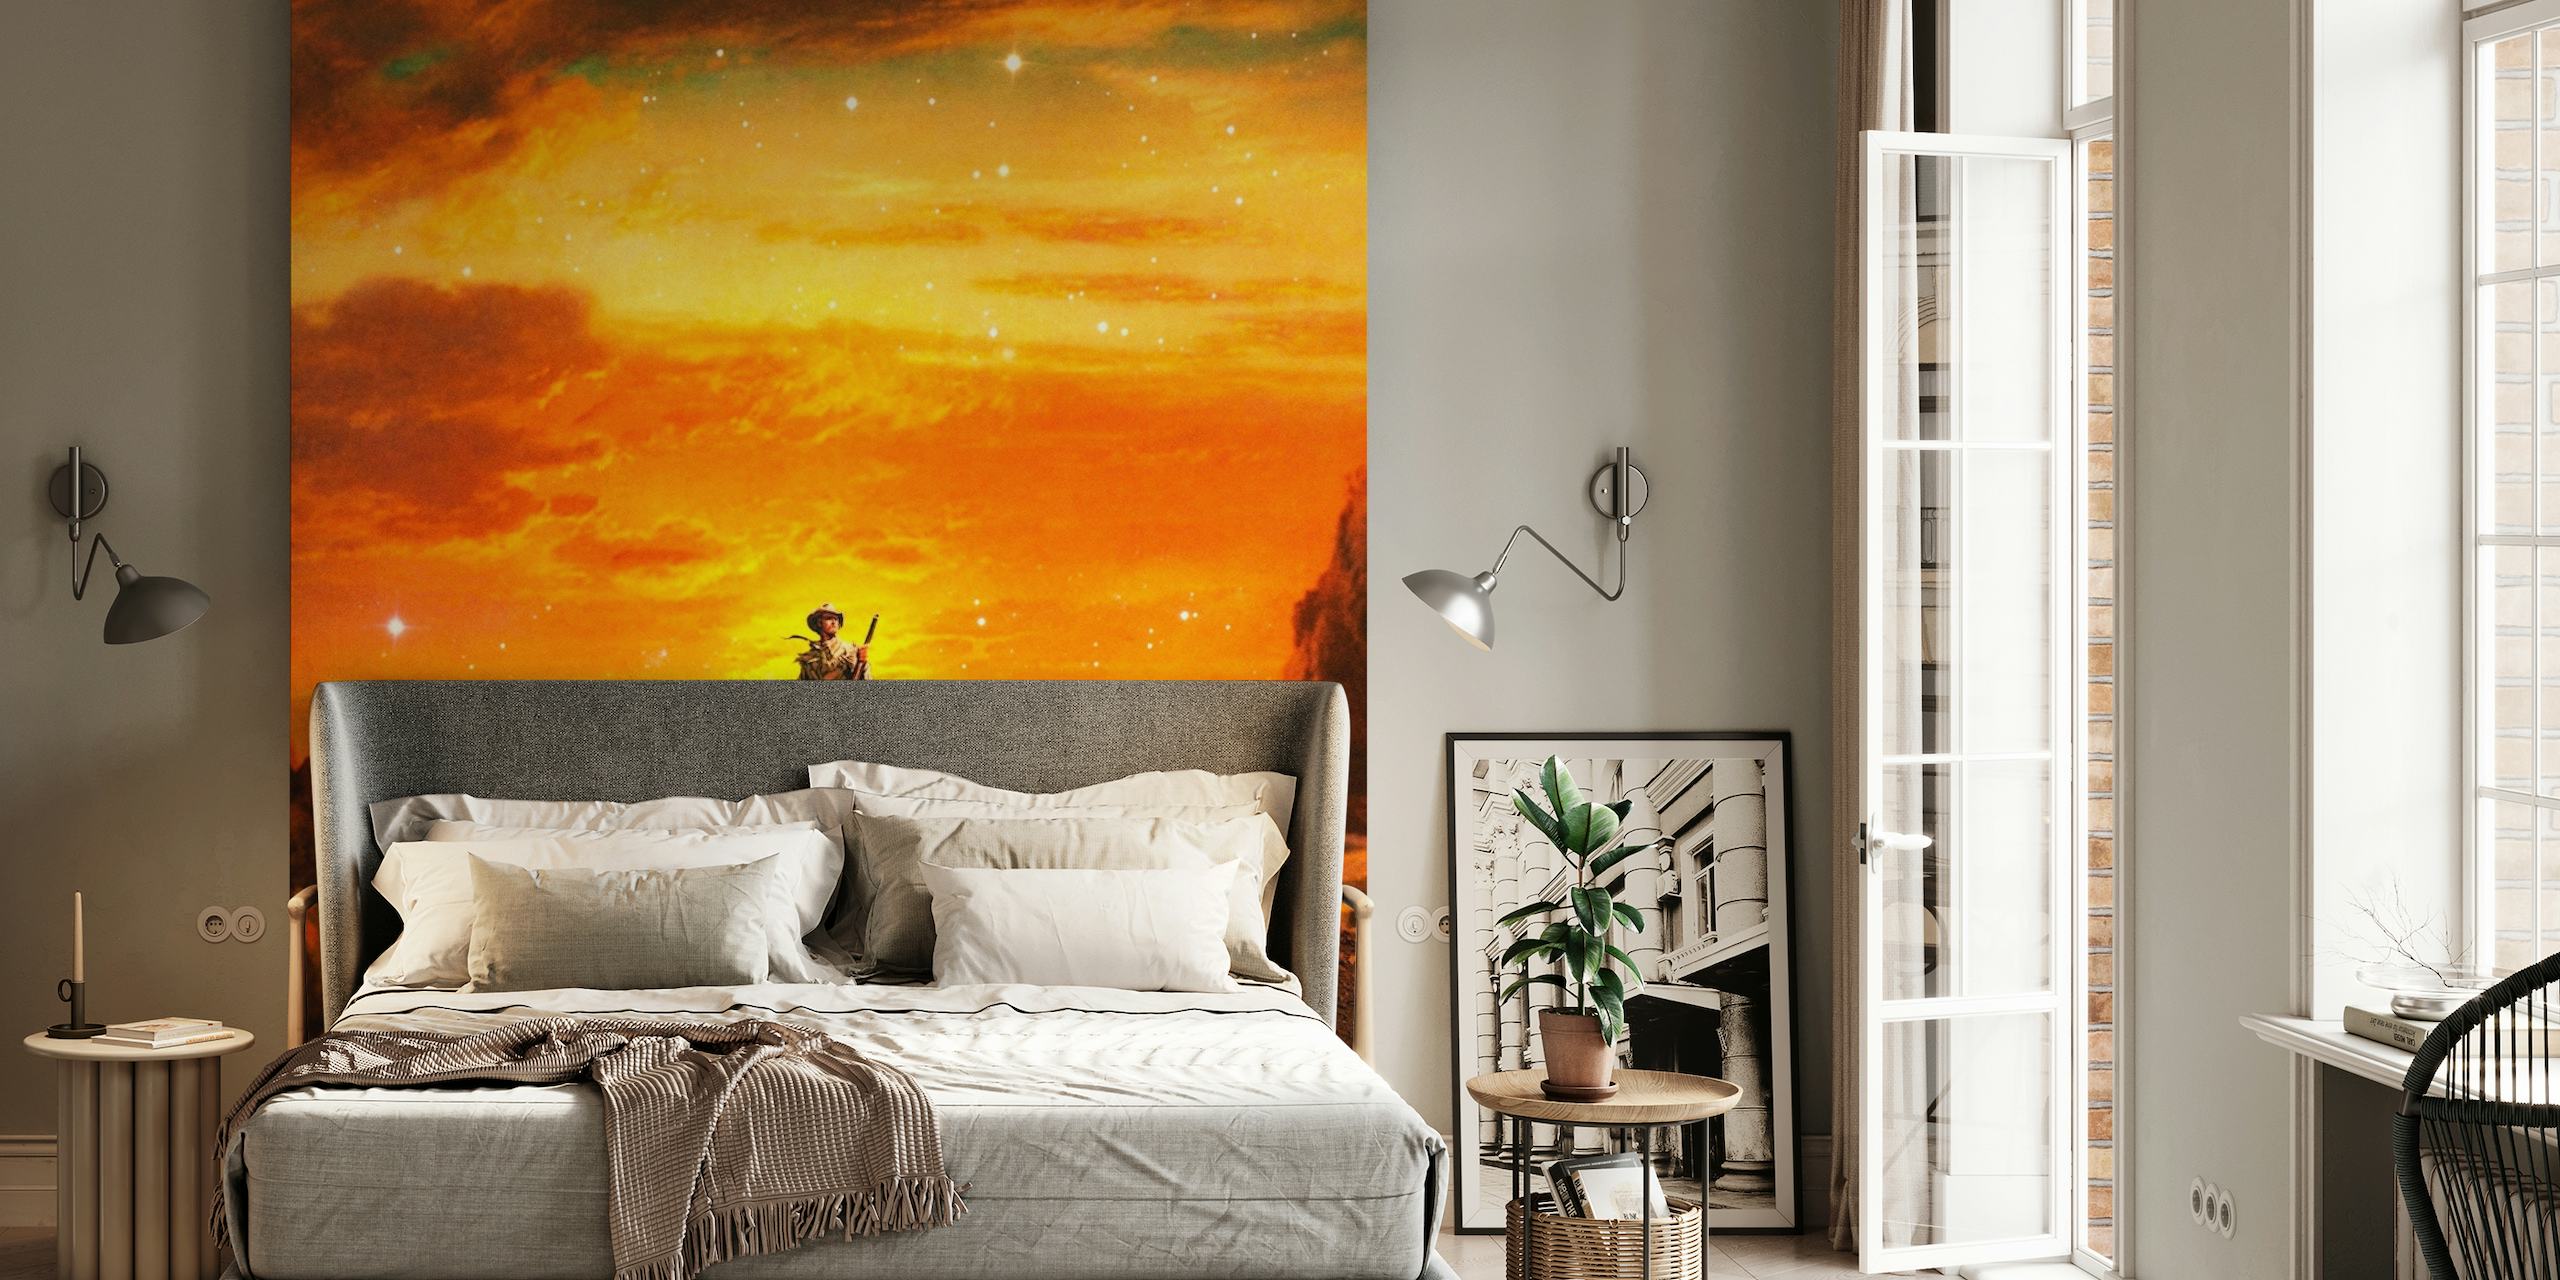 Knight in sunset landscape wall mural depicting courage and adventure